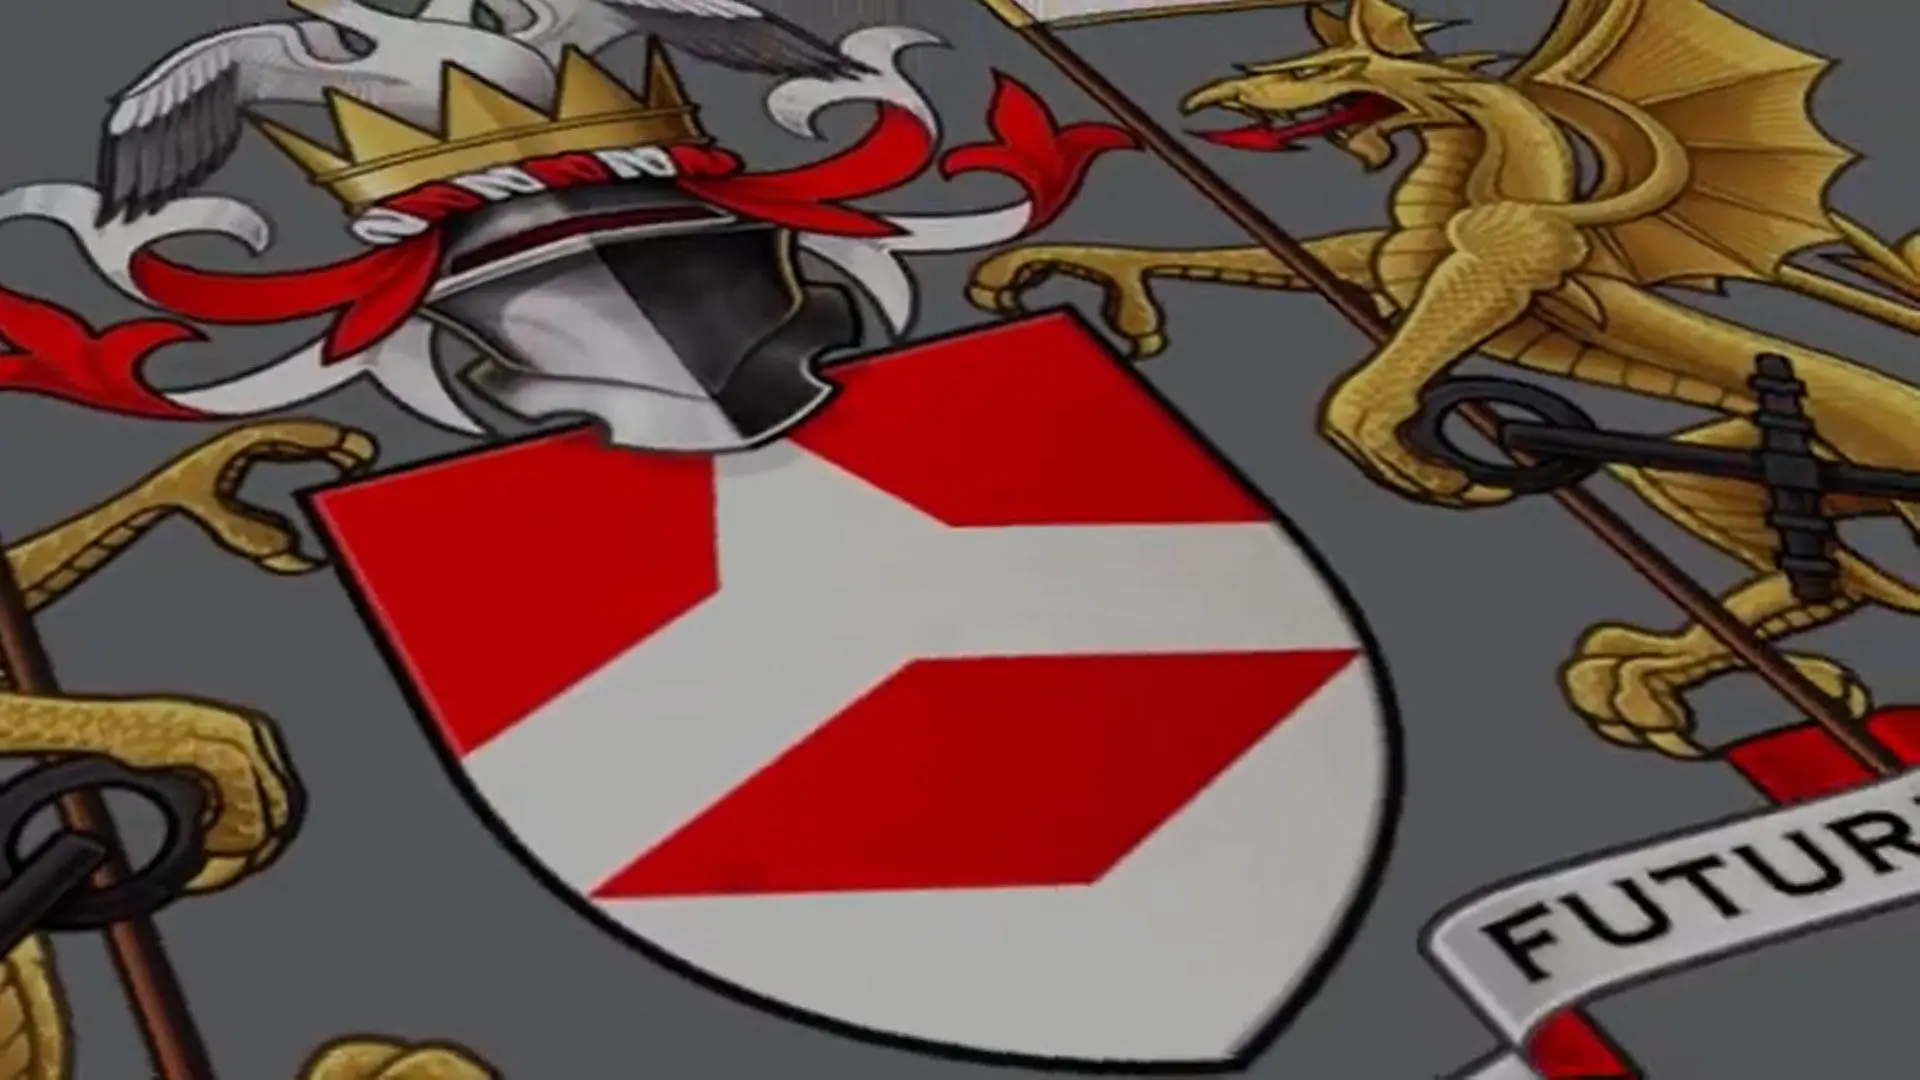 Close-up of the Solent Coat of Arms